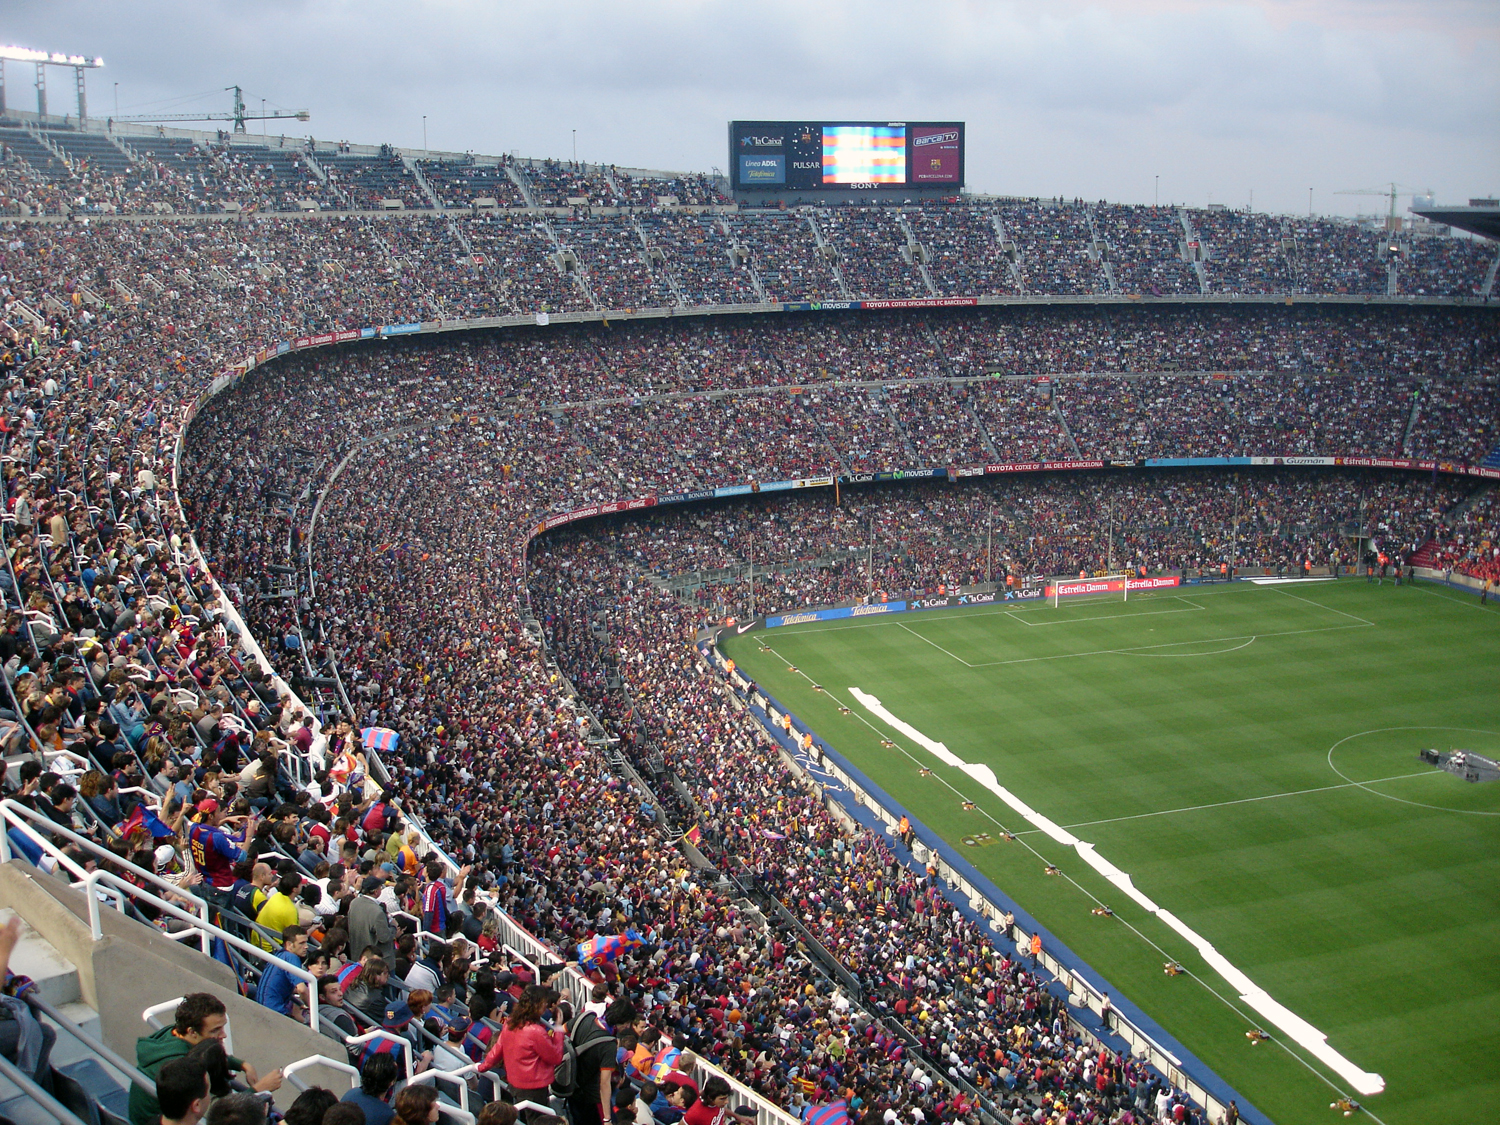 The biggest stadiums in Spain